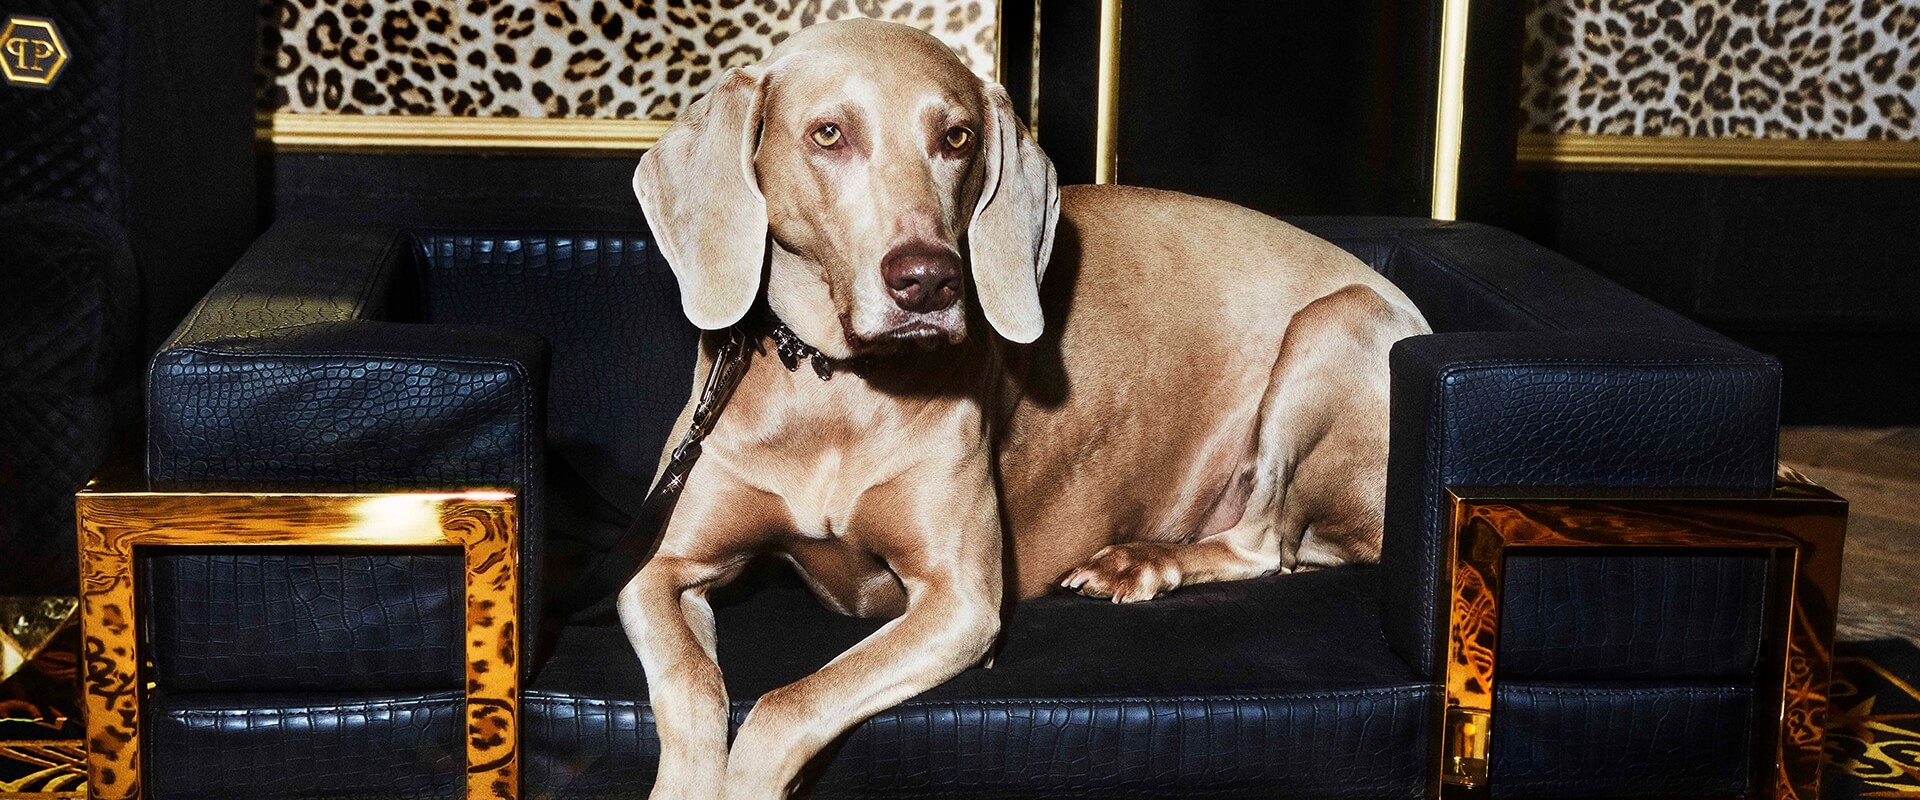 Philipp Plein on Turning a €1,500 Dog Bed Into a Fashion Empire